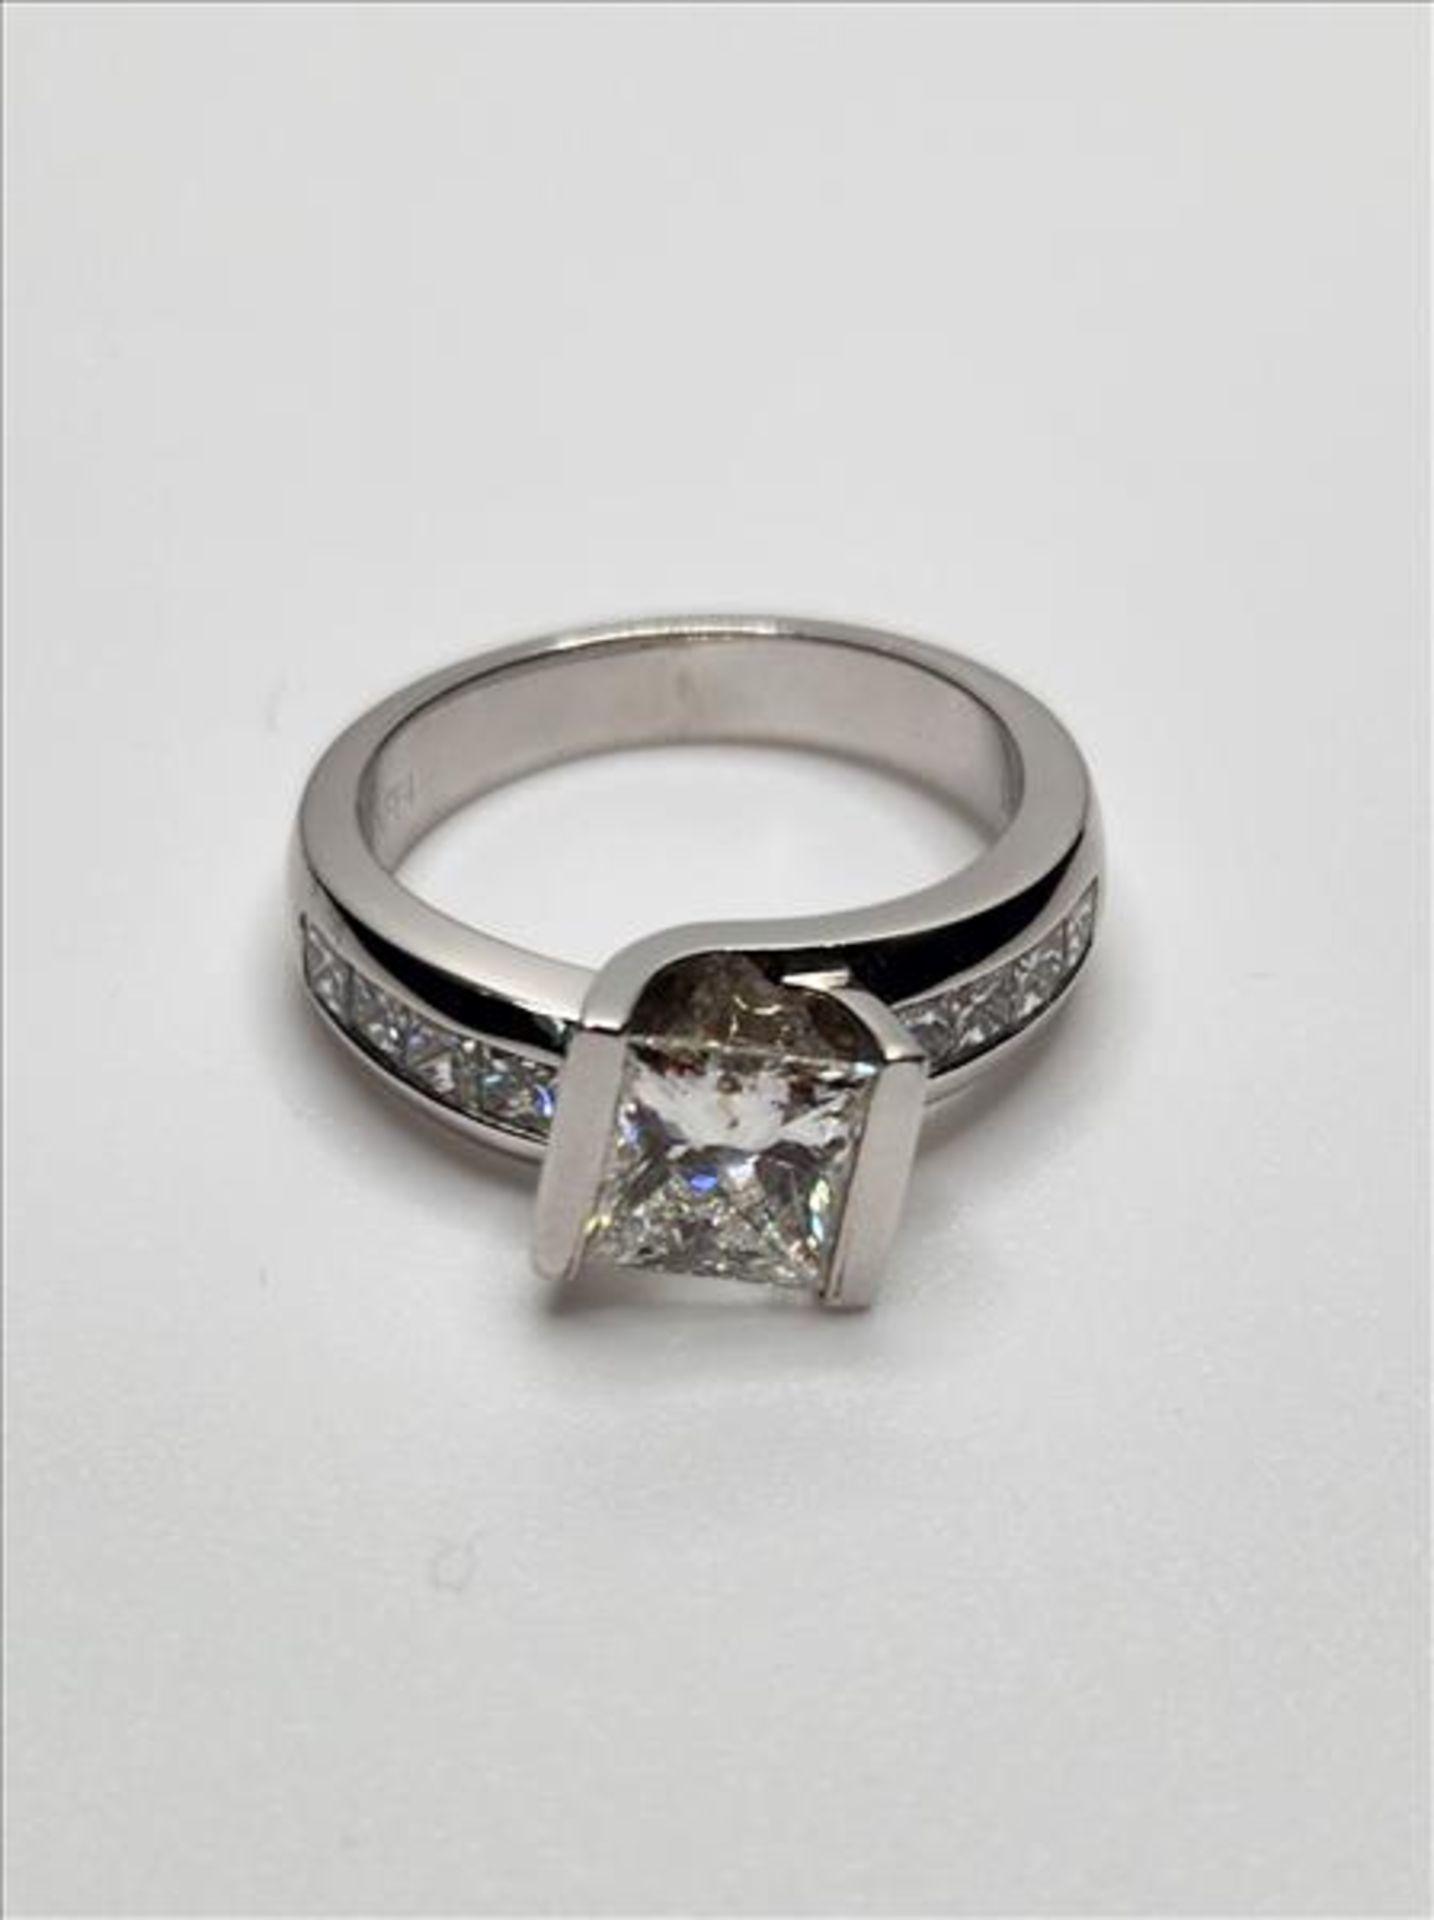 One lady’s stamped RAFP4 and tested 14kt white gold diamond ring by Michael Hill. Contained at the